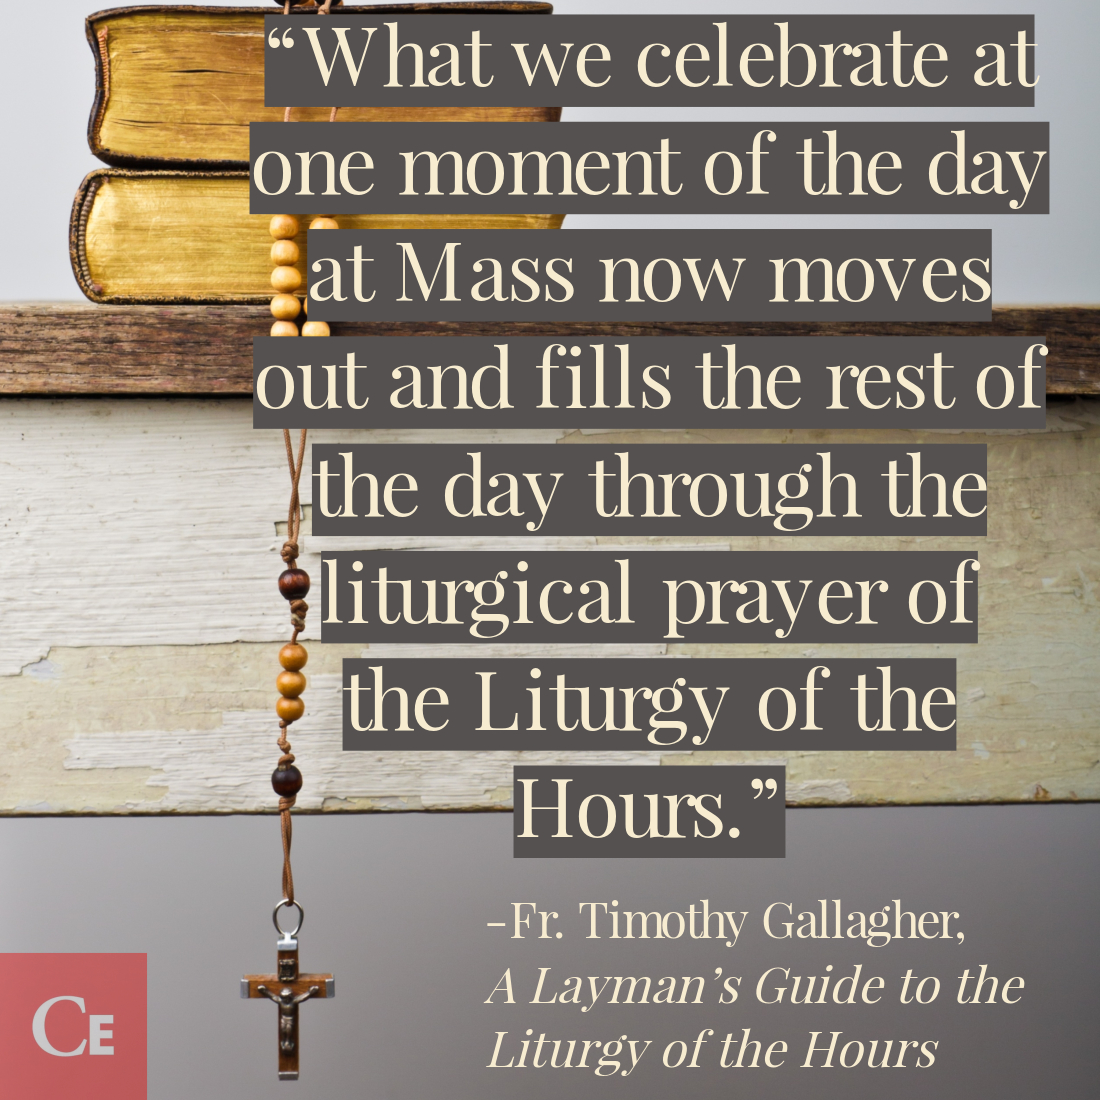 What Is the Liturgy of the Hours?